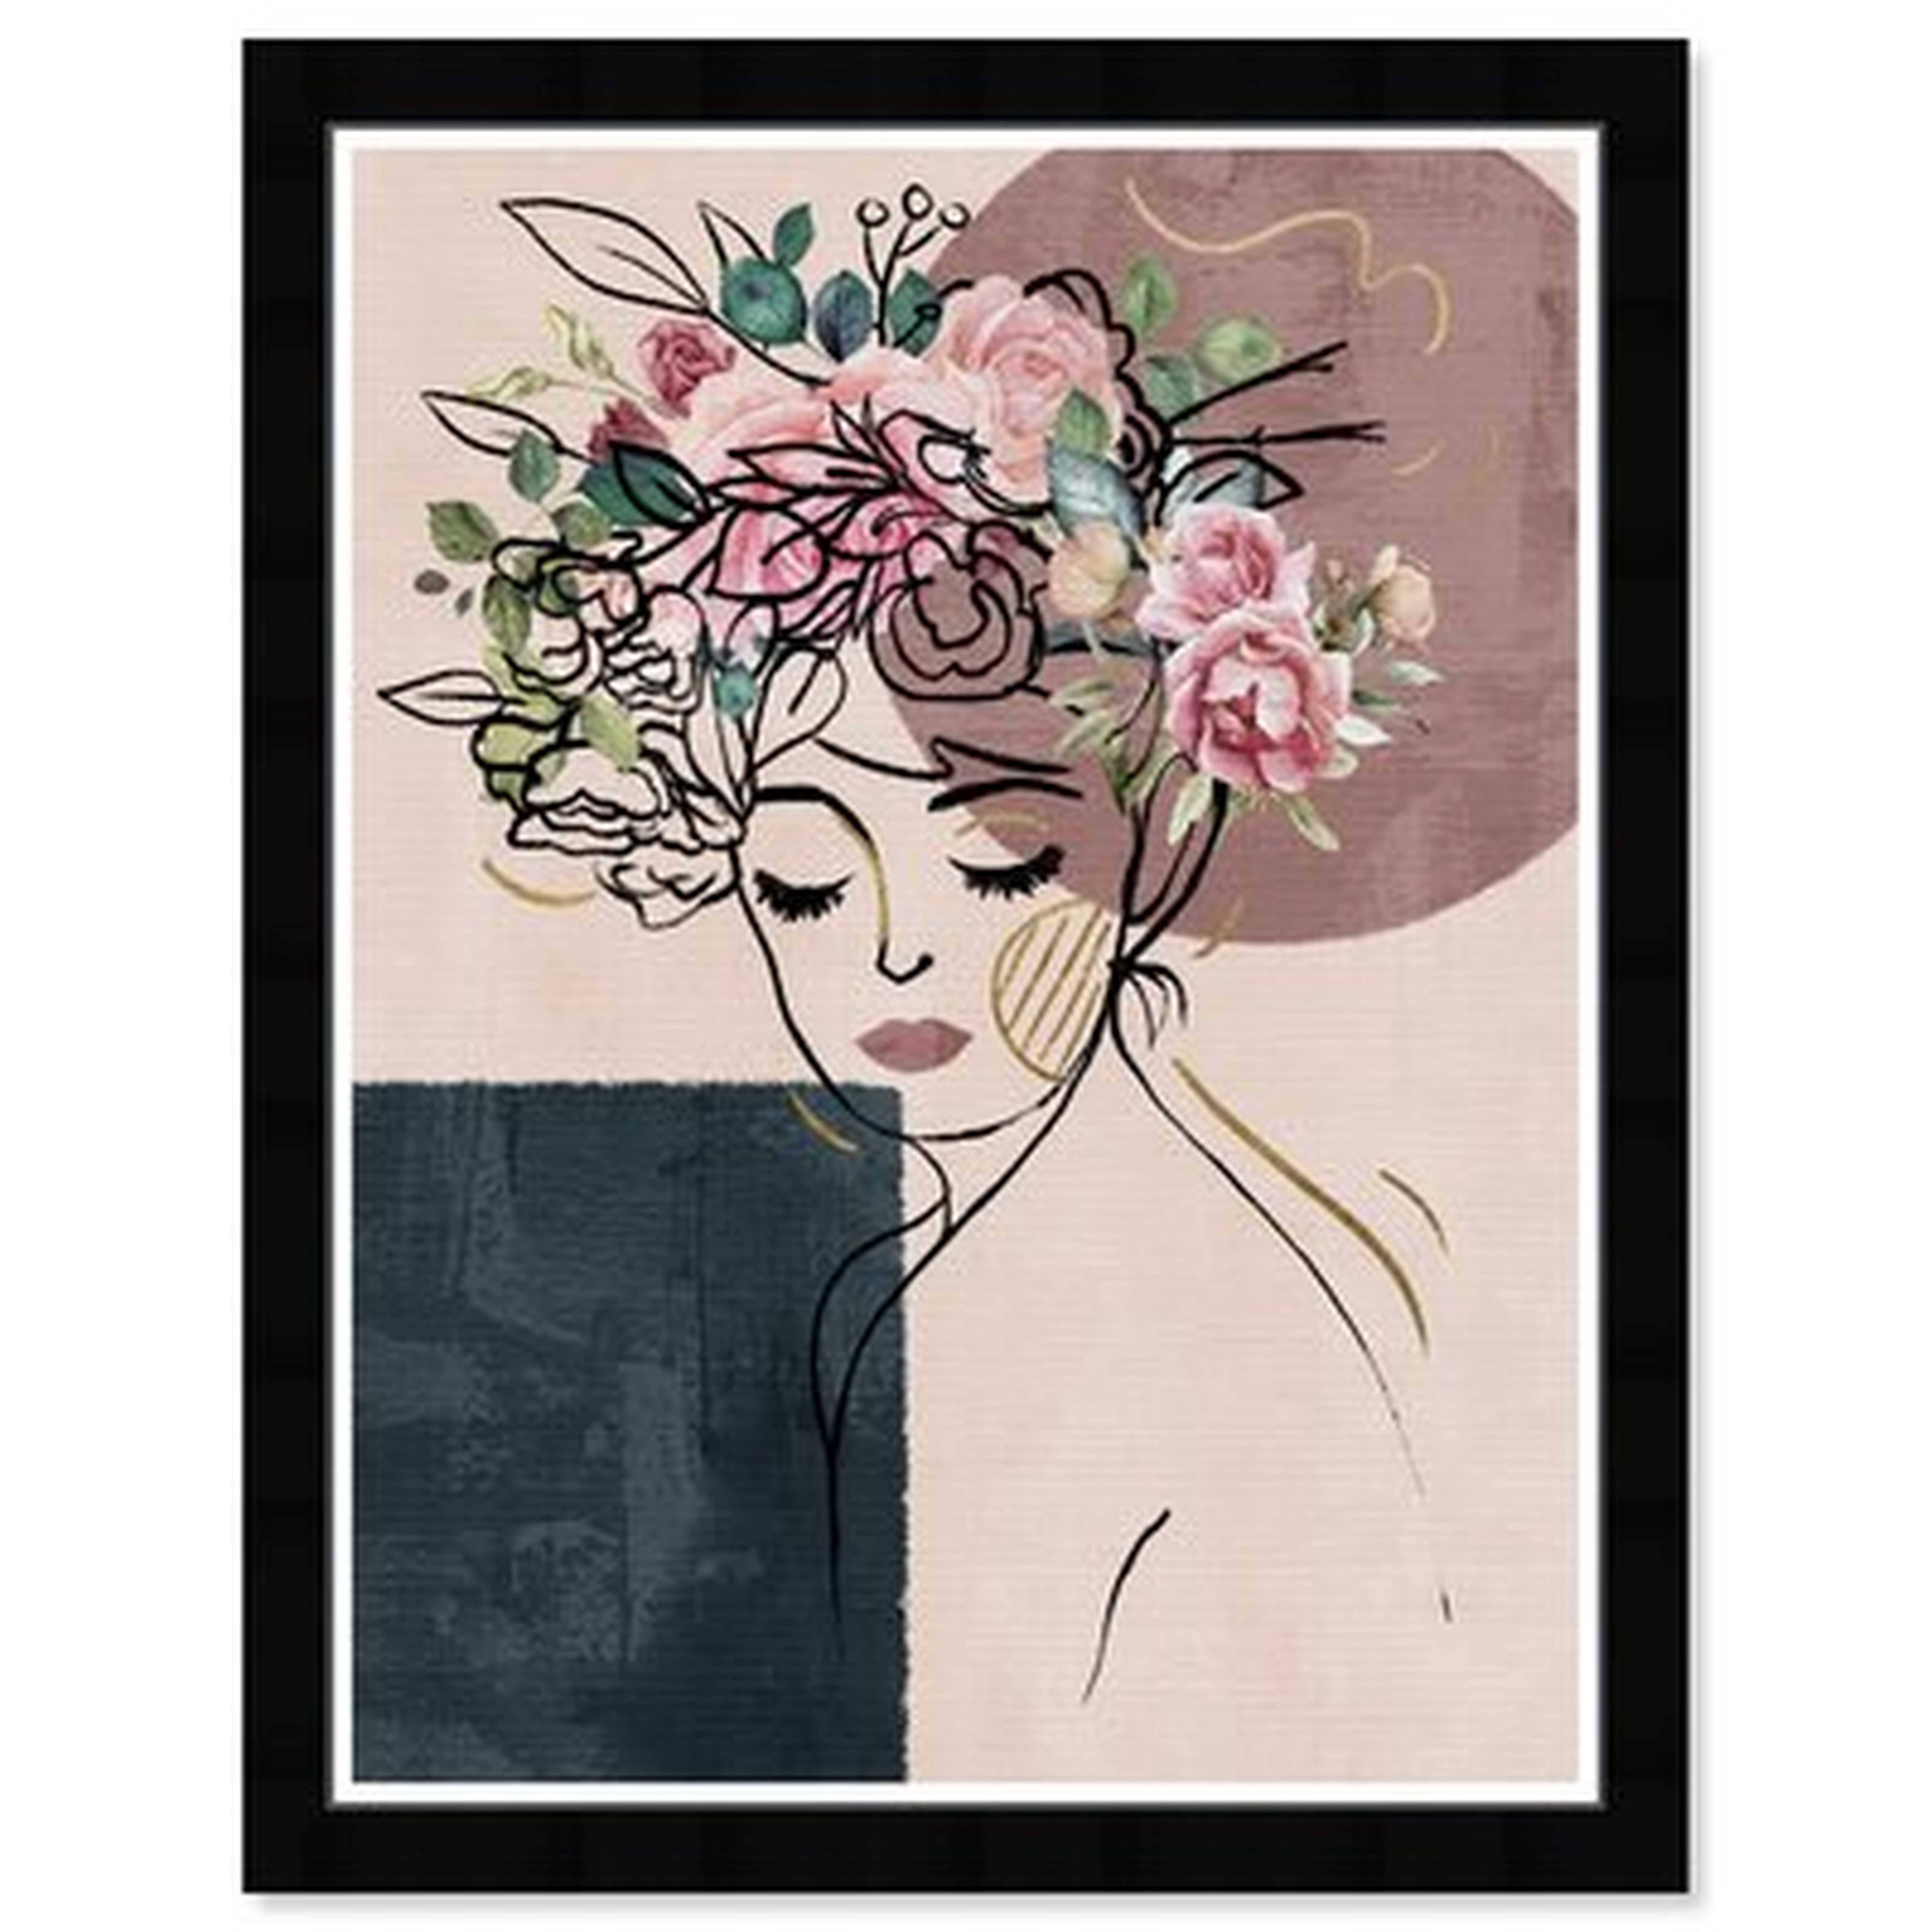 Fashion and Glam Flower Noir Portraits - Picture Frame Painting Print on Paper - Wayfair